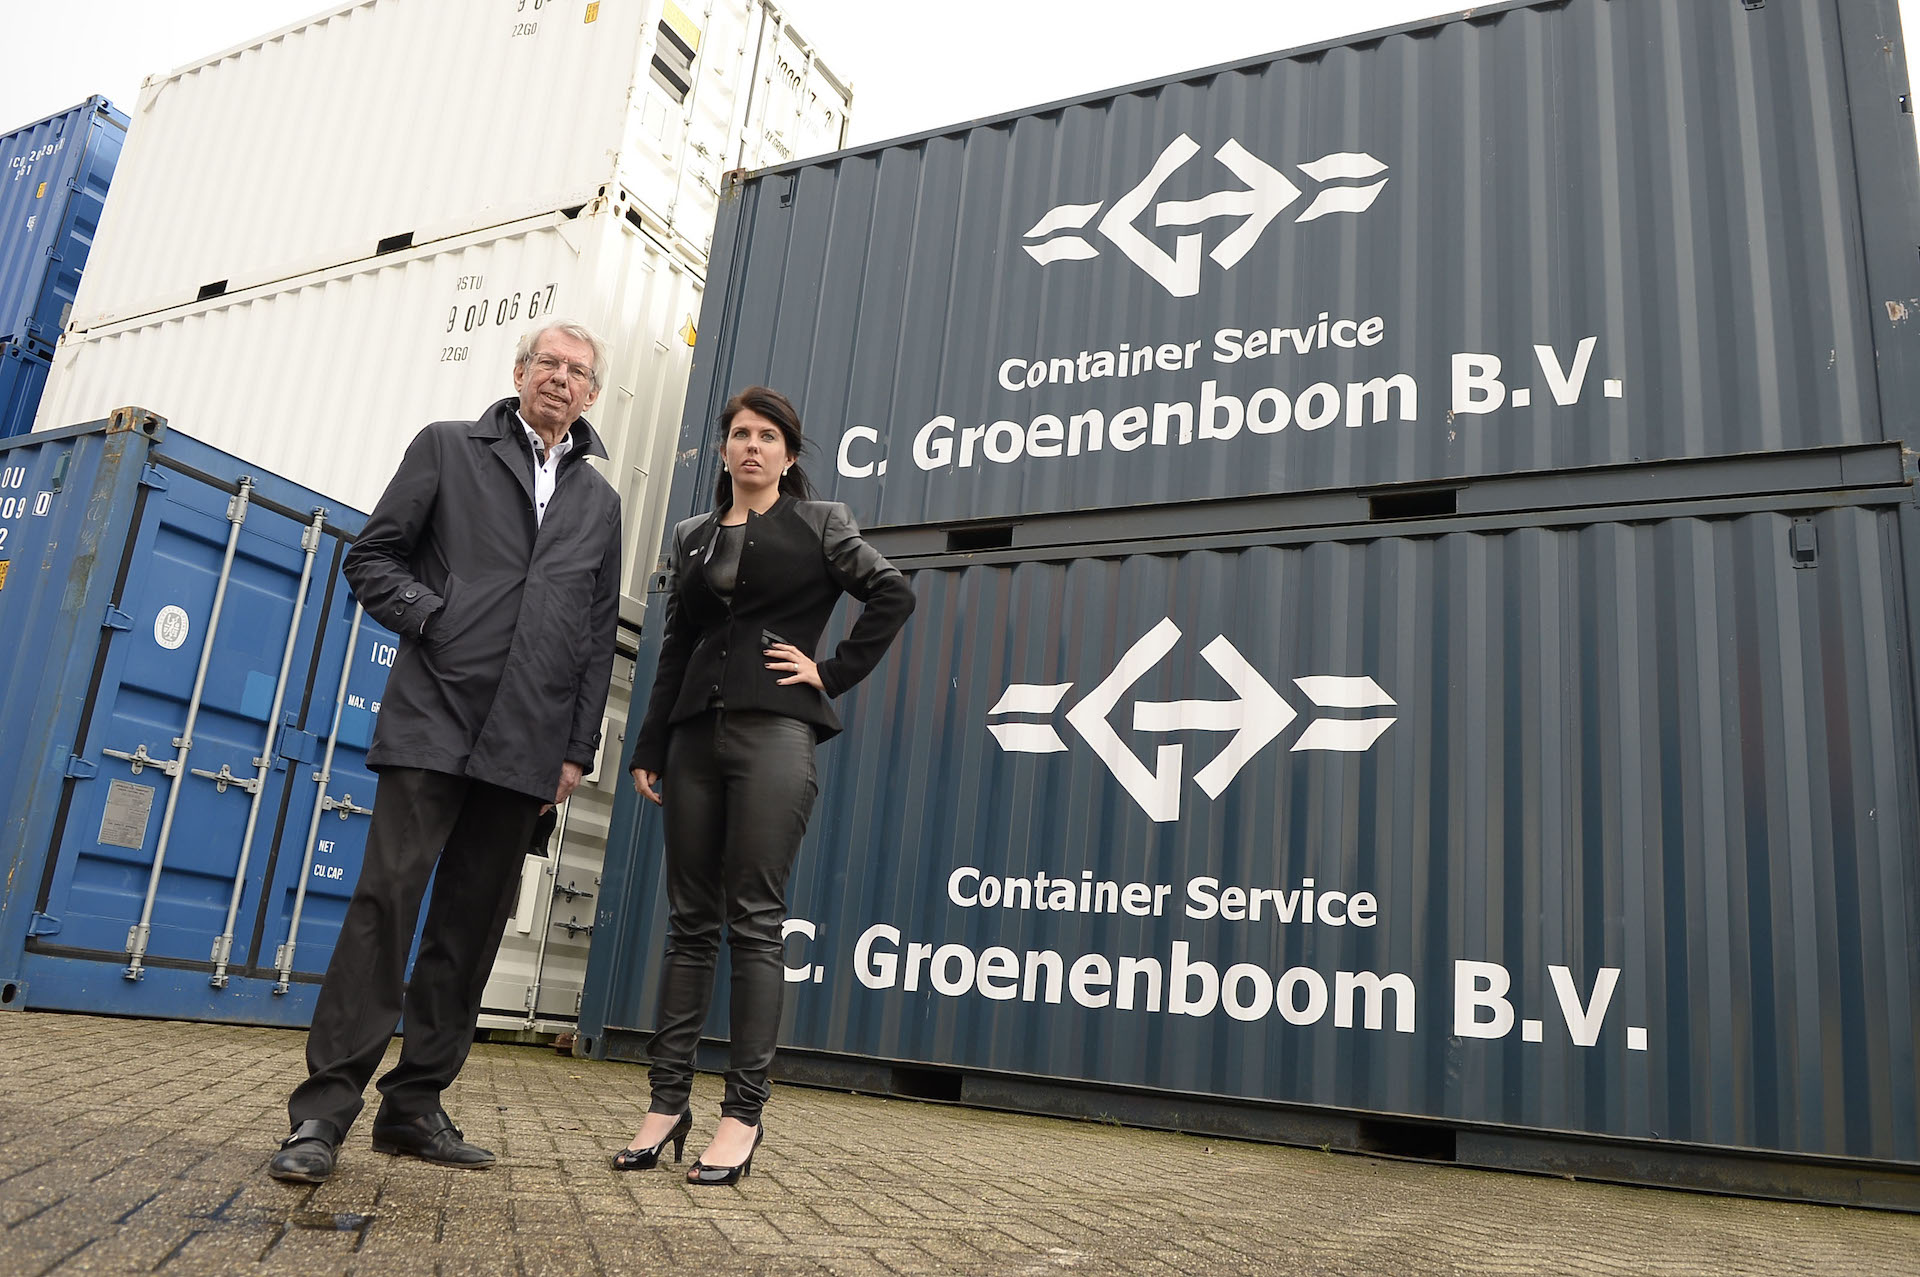 Groenenboom containers